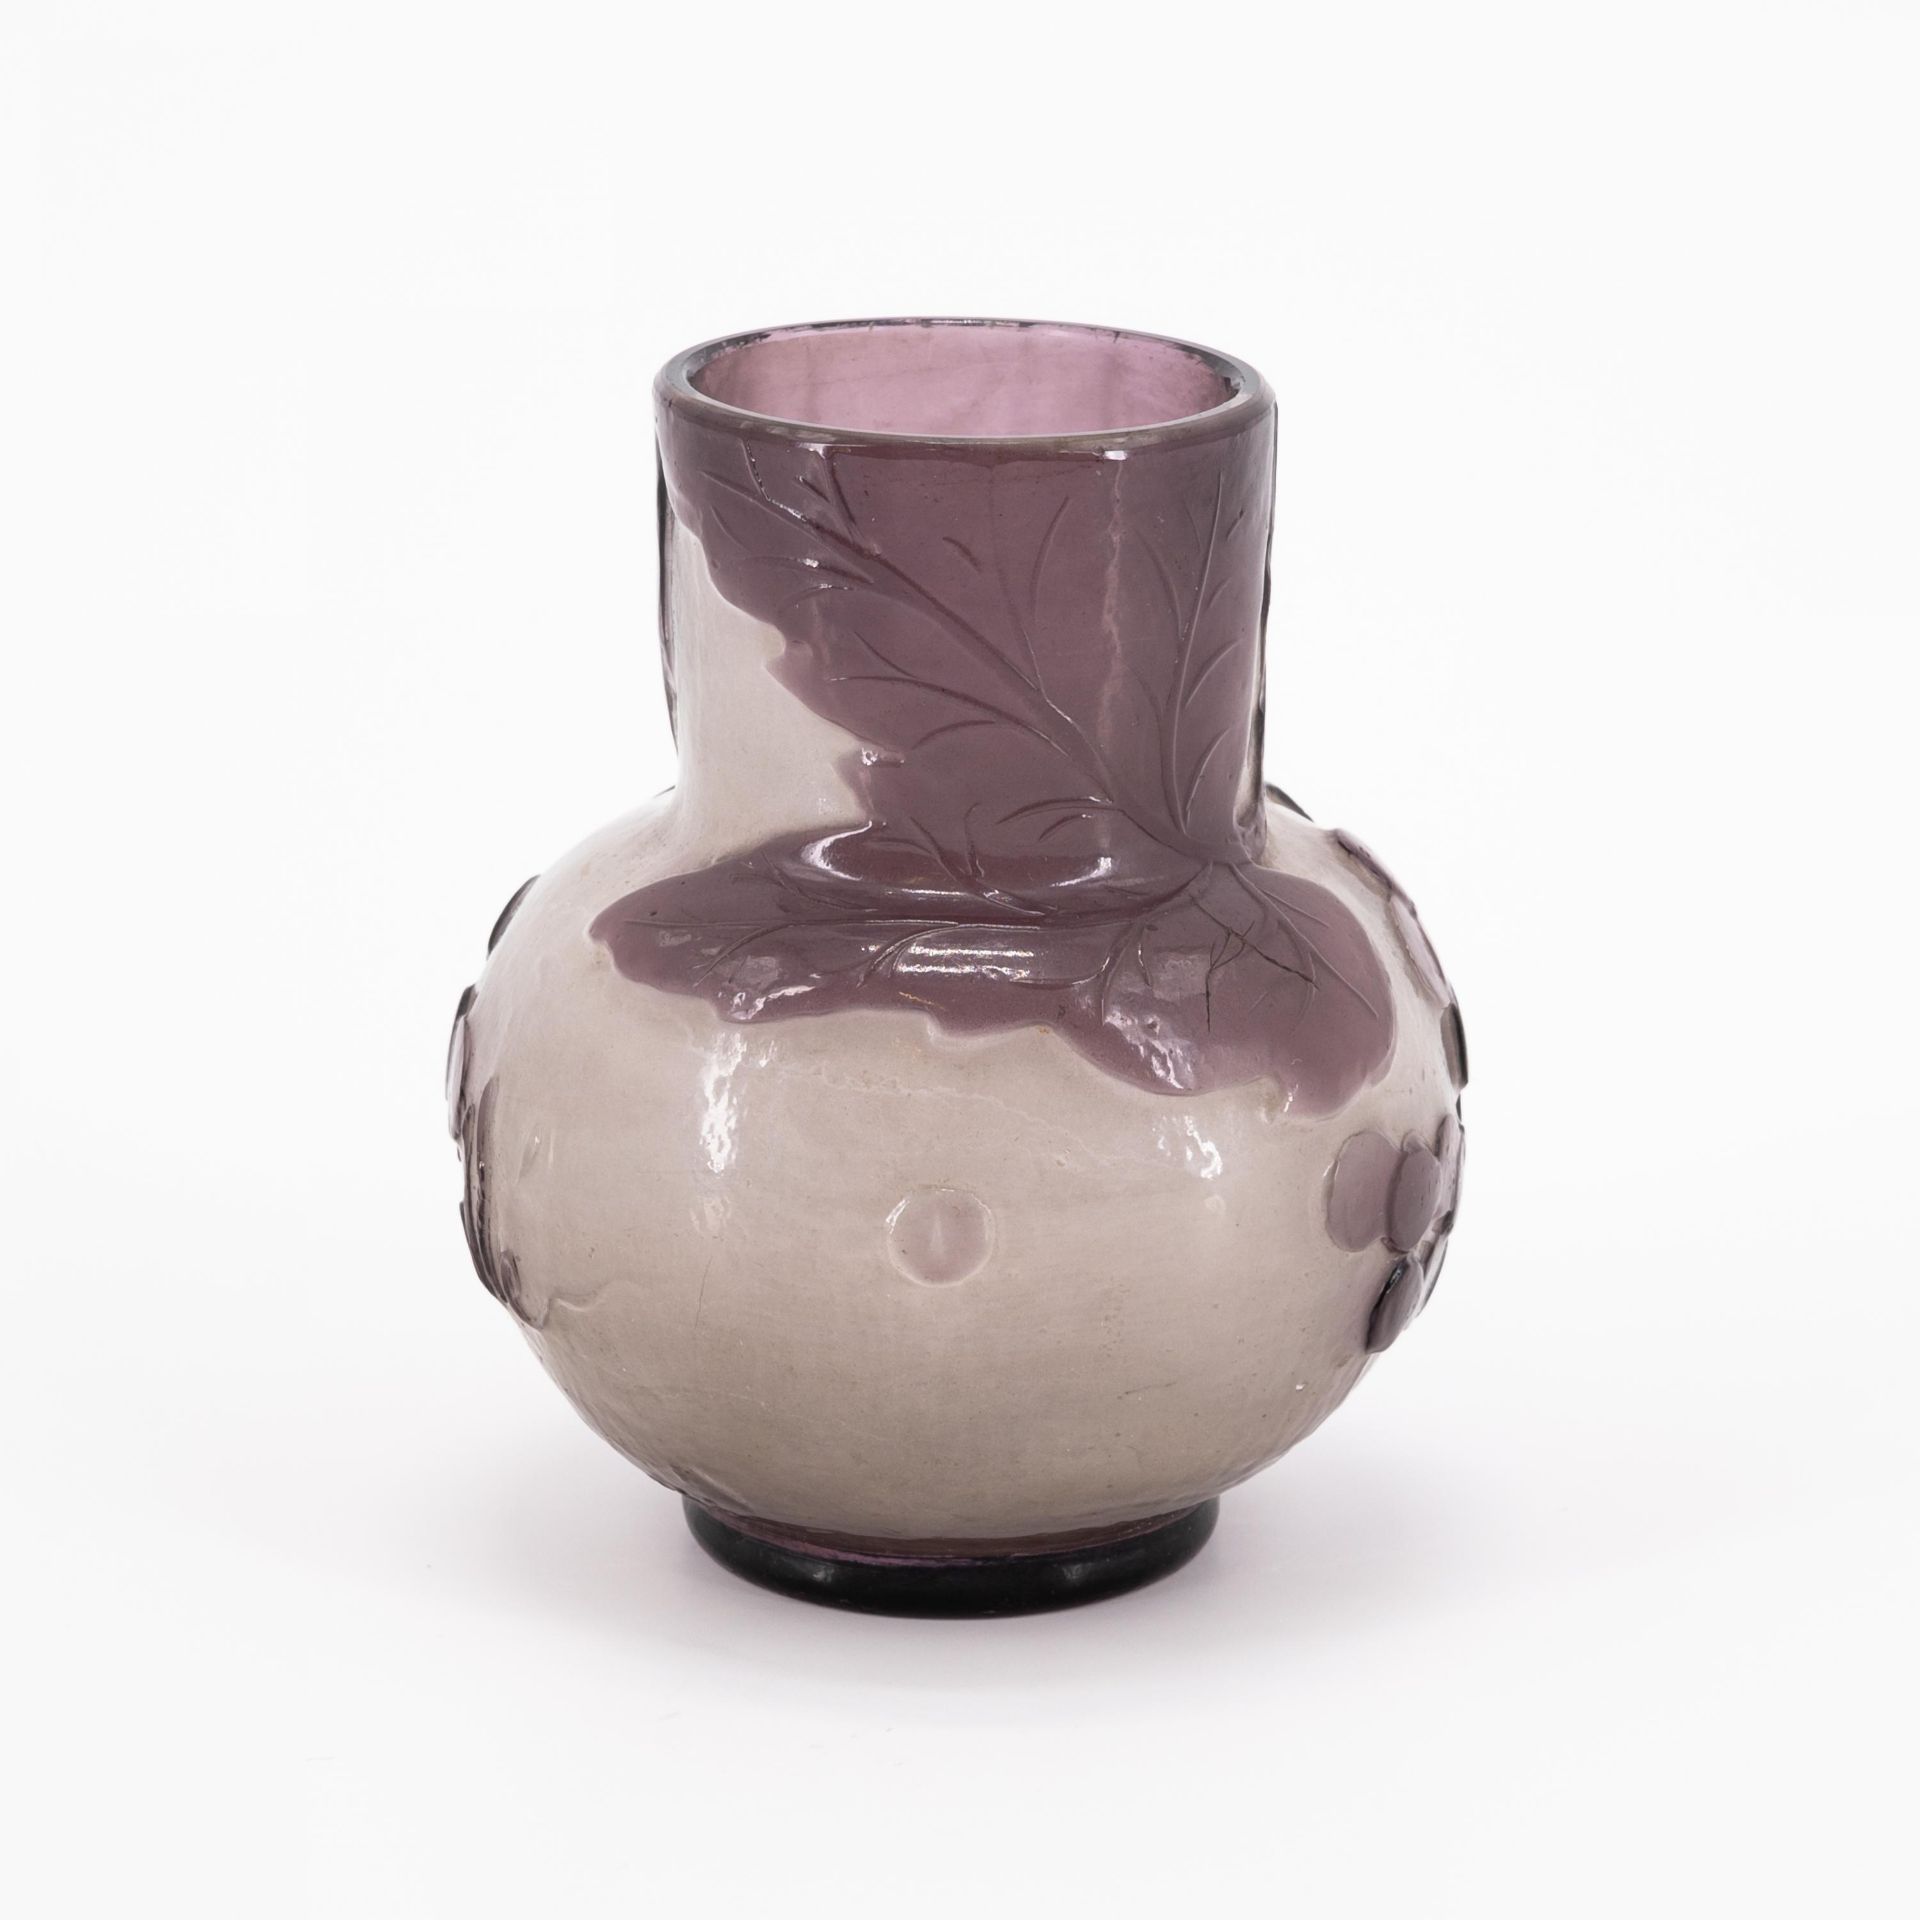 MINIATURE GLASS VASE WITH VINE LEAVES - Image 3 of 6